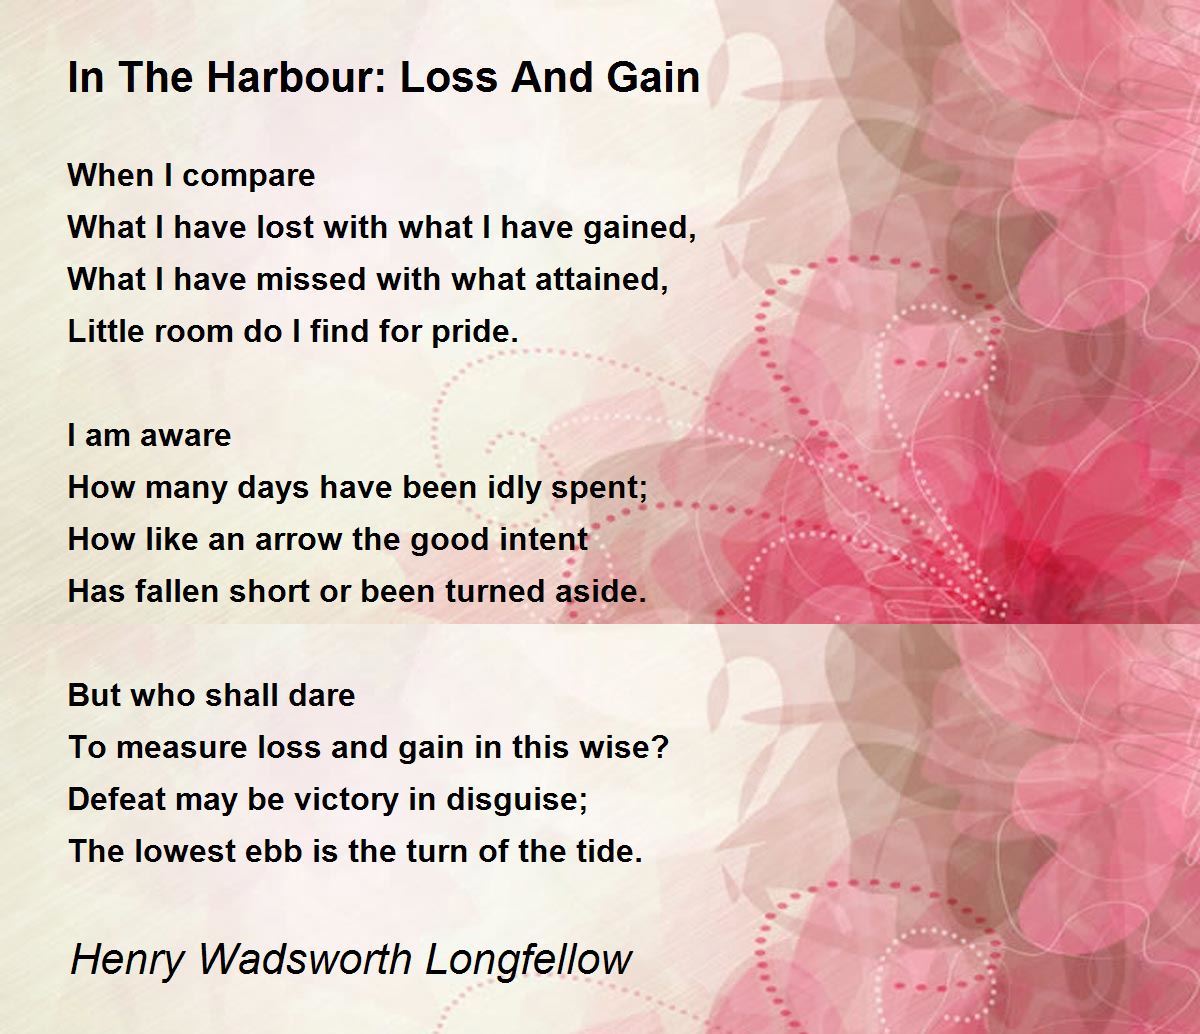 In The Harbour: Loss And Gain Poem by Henry Wadsworth Longfellow - Poem